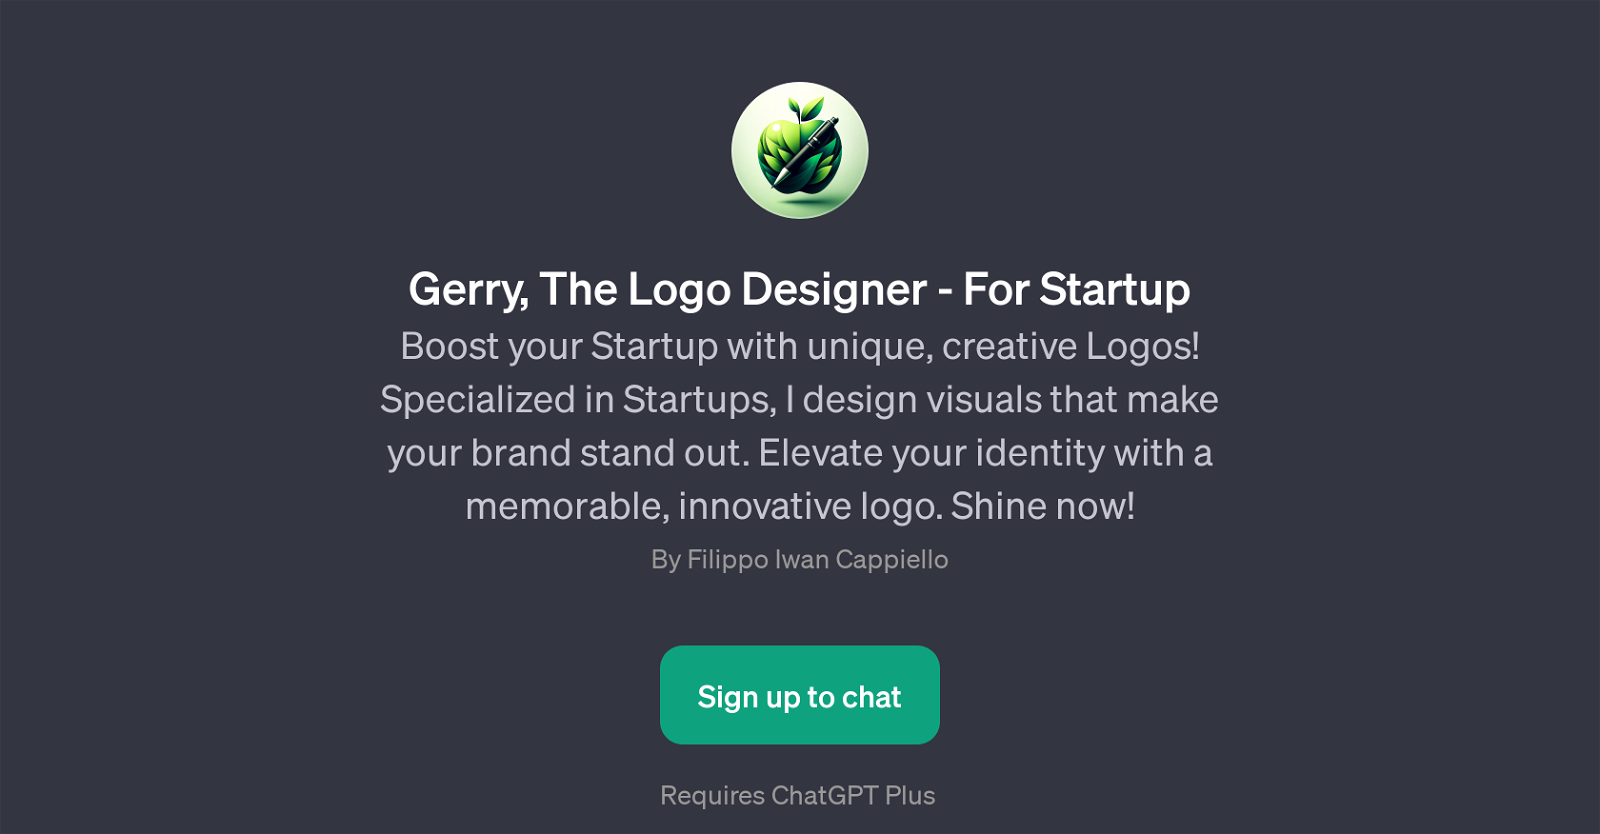 Gerry, The Logo Designer - For Startup And 136 Other AI